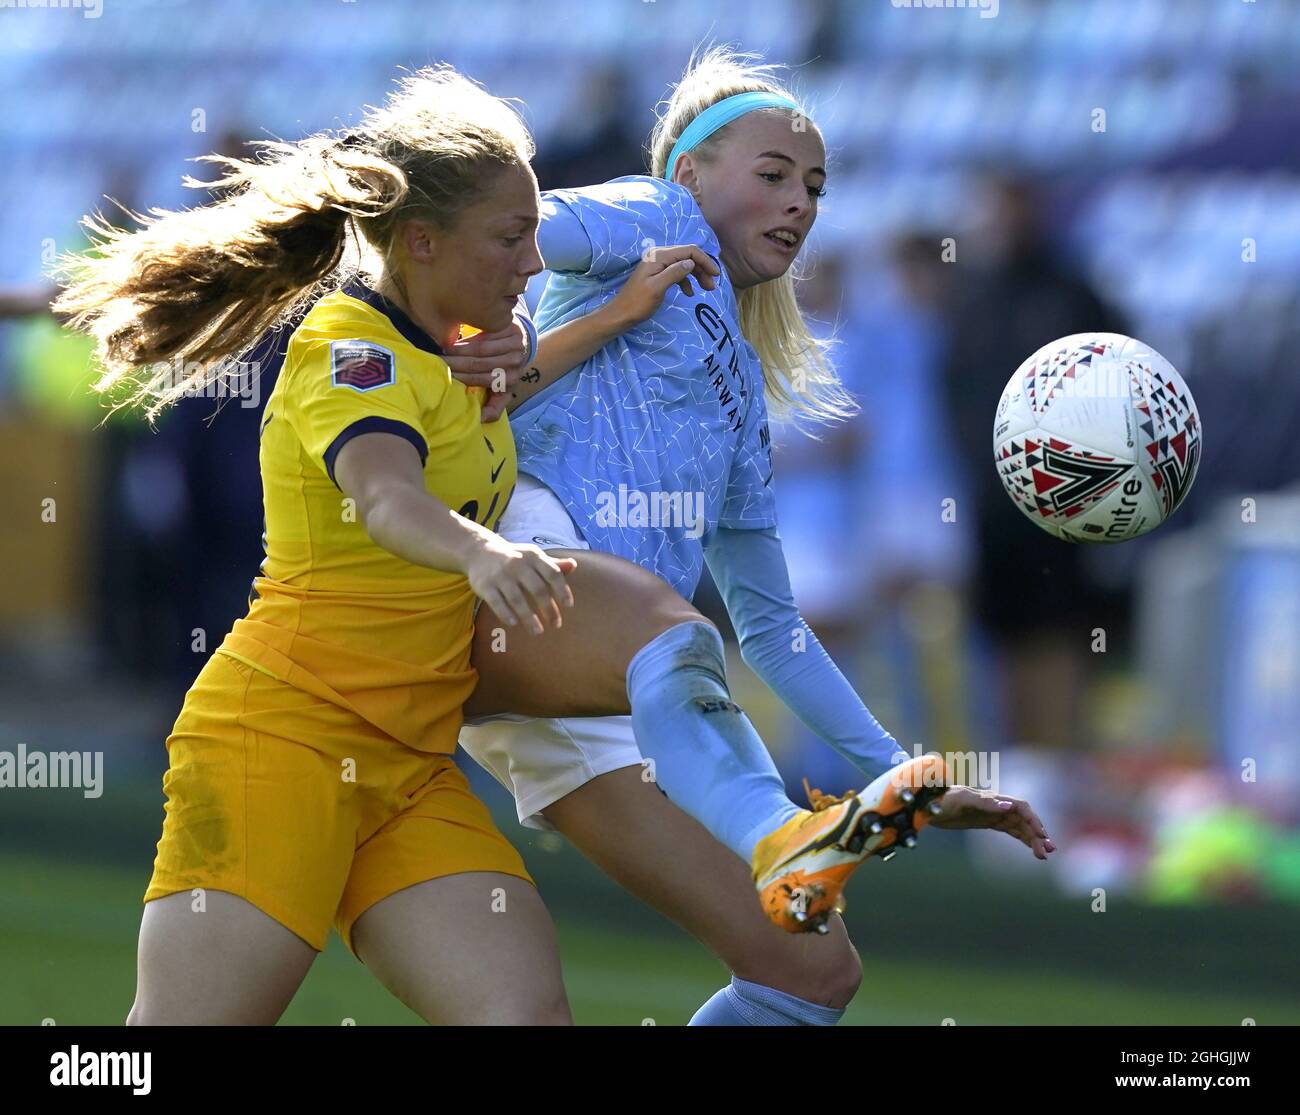 Chloe Kelly of Manchester City (R) holds off Angela Addison of Tottenham Hotspur during the The FA WomenÕs Super League match at Manchester City Academy Stadium, Manchester. Picture date: 4th October 2020. Picture credit should read: Andrew Yates/Sportimage via PA Images Stock Photo